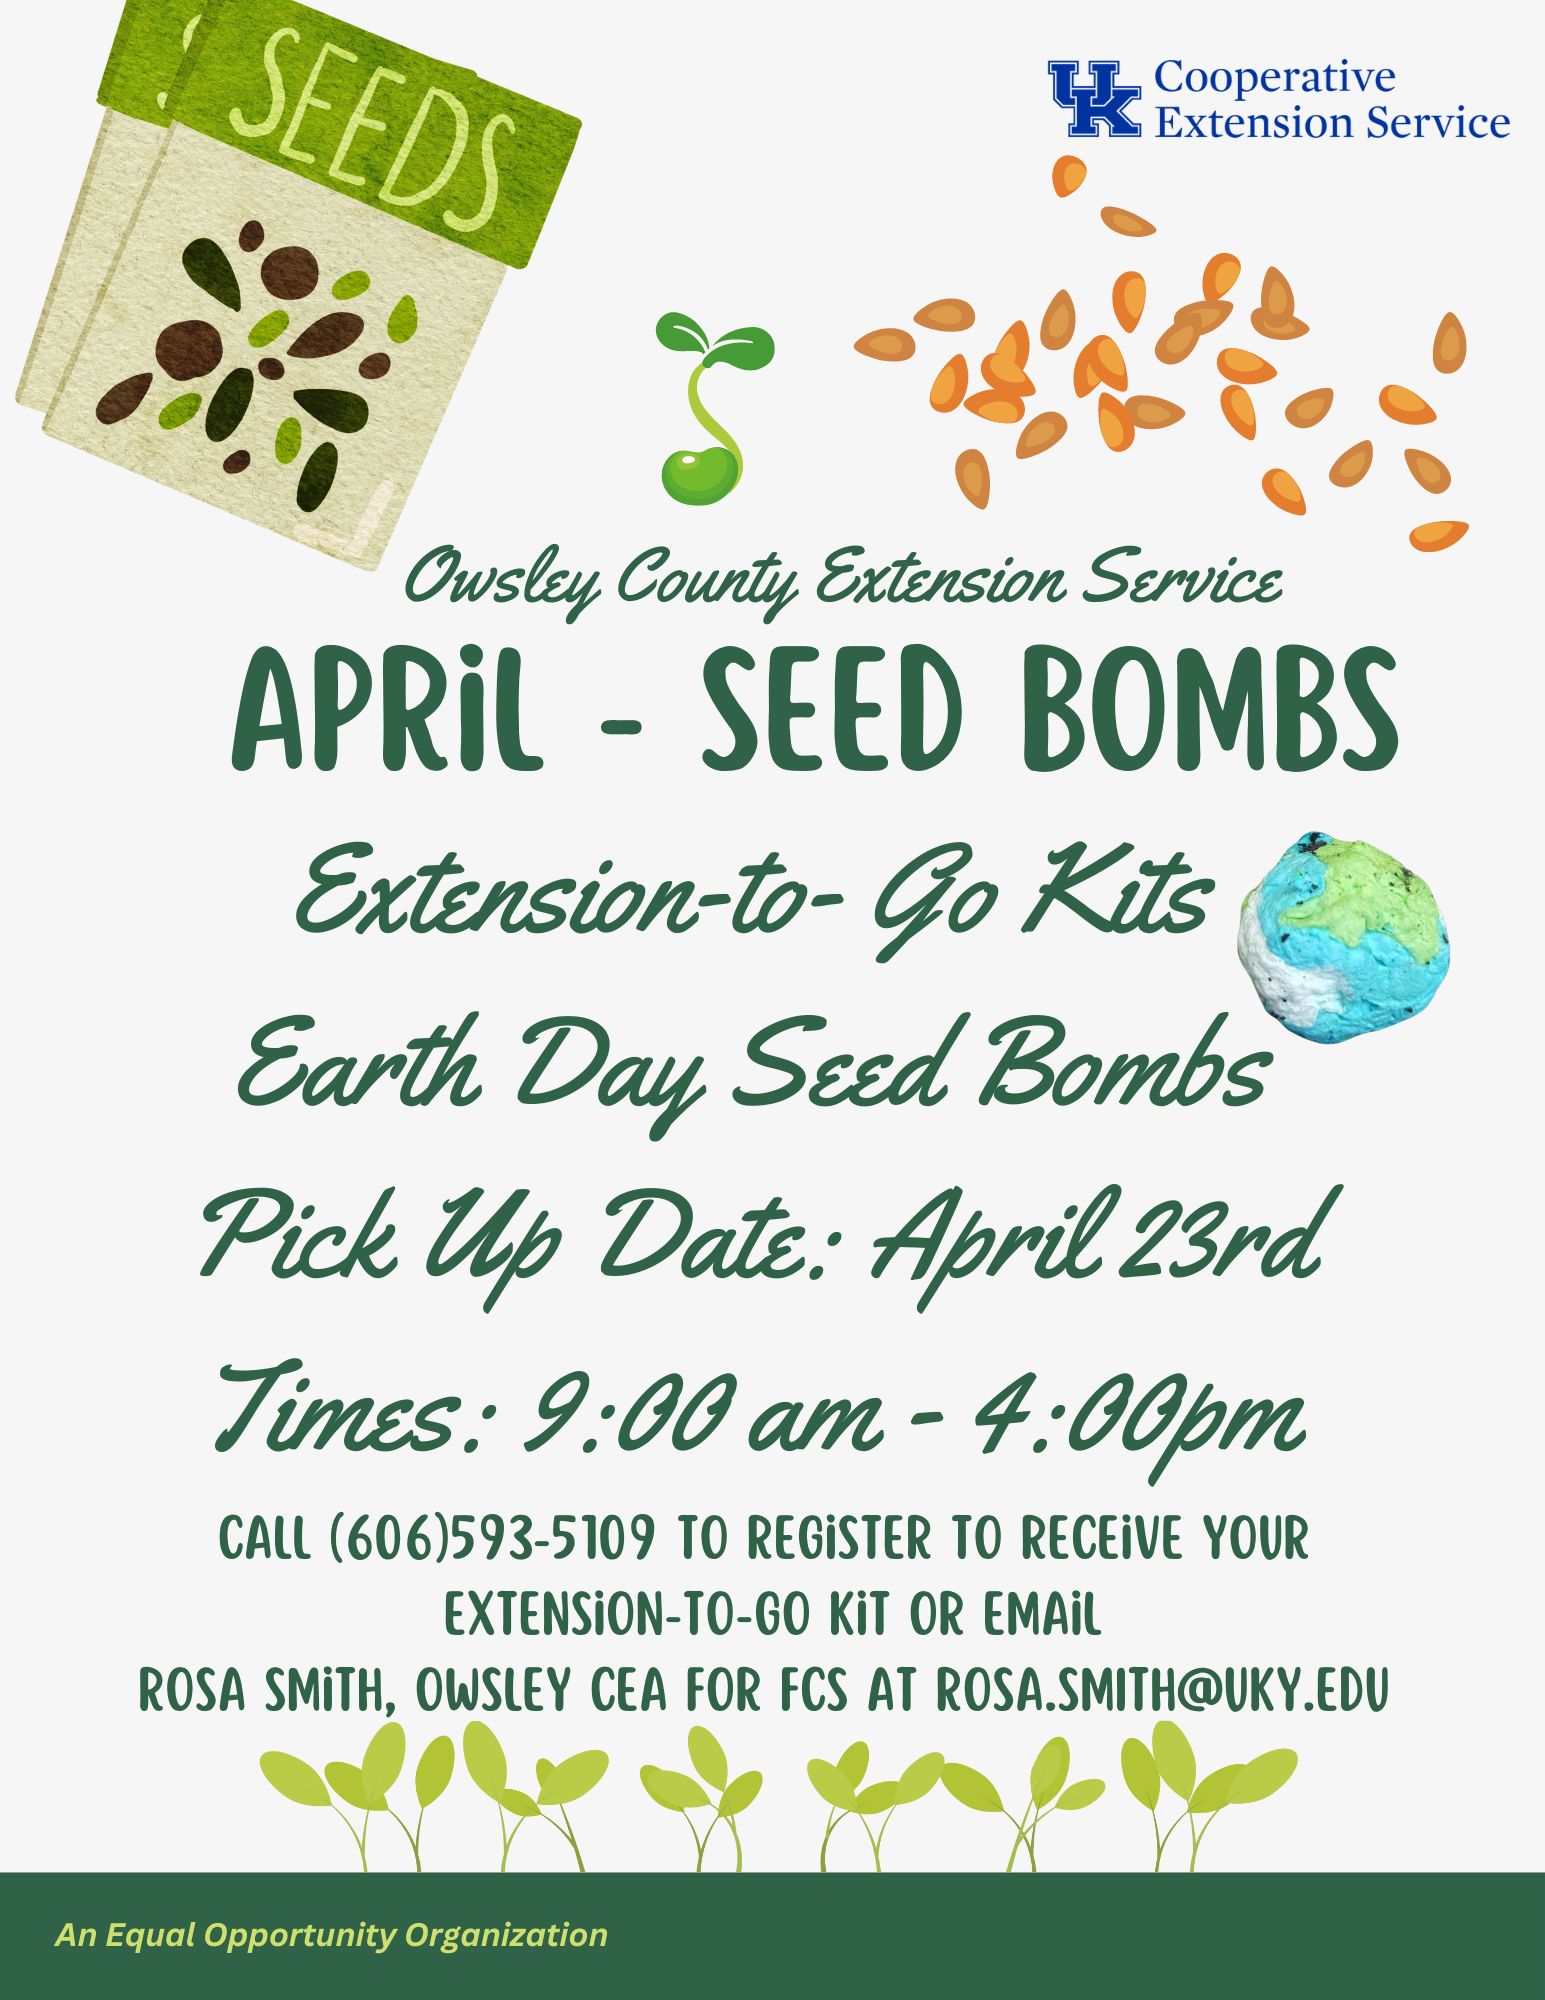 Flyer about picking up kit to make Seed Bombs for Earth Day